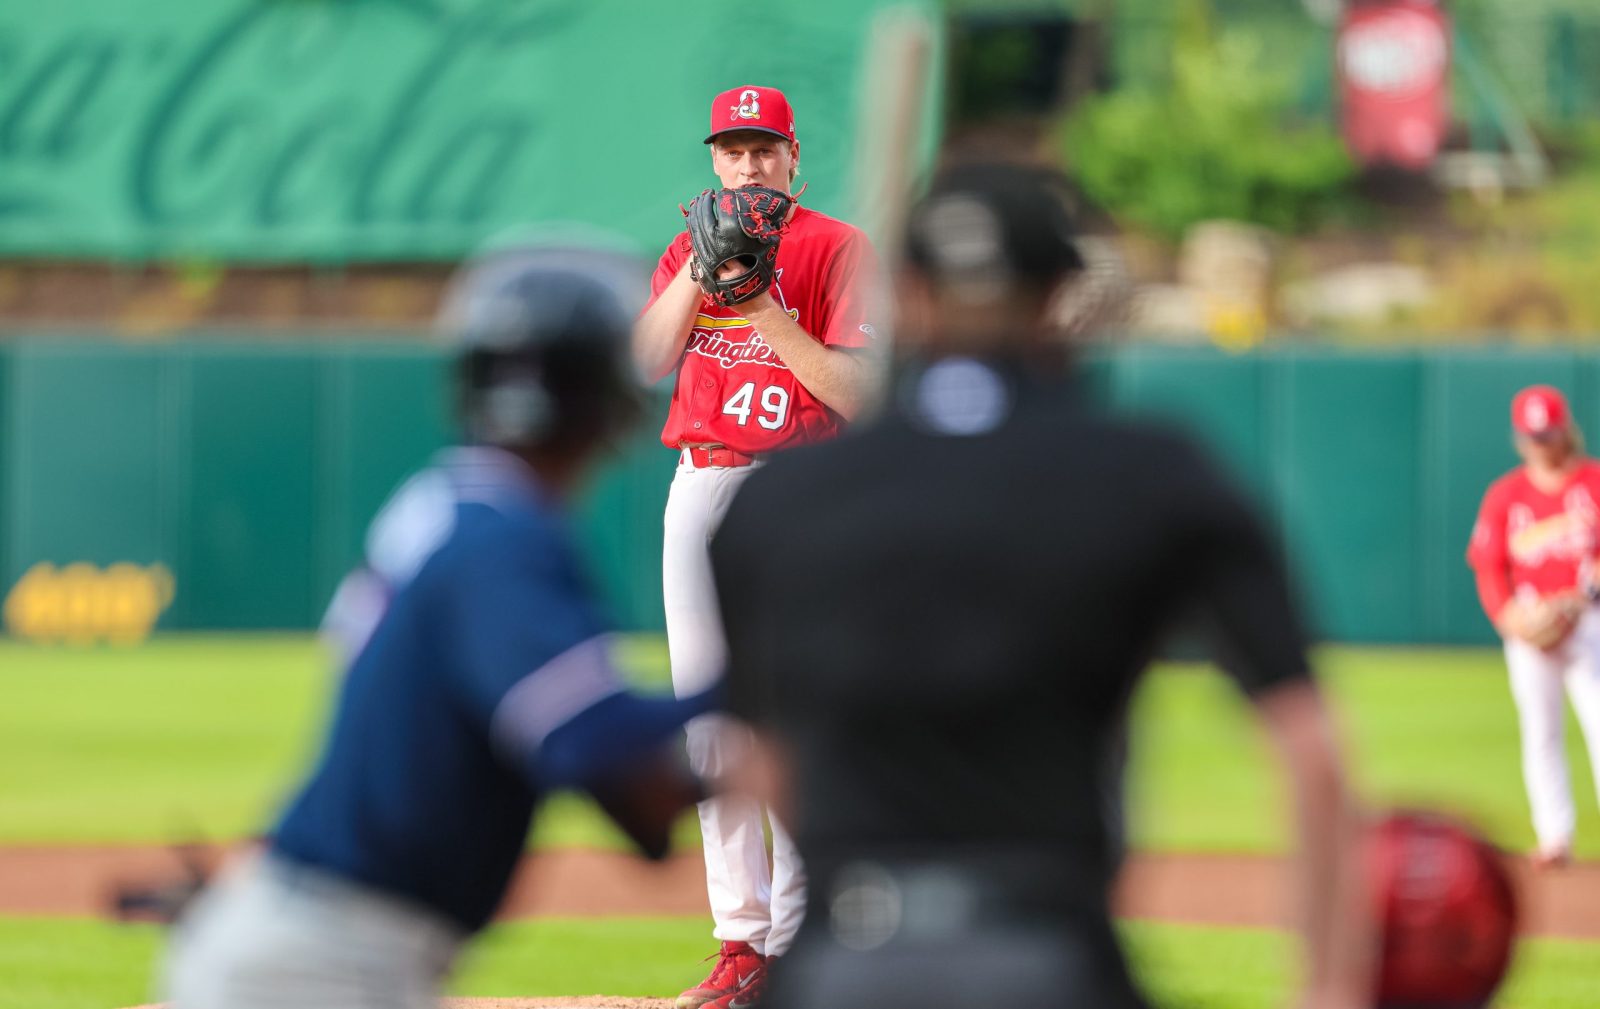 Logan Gragg, wearing a Springfield Cardinals uniform, gets ready to pitch the baseball during a game. He's in the background, with the batter and umpire out of focus in the foreground